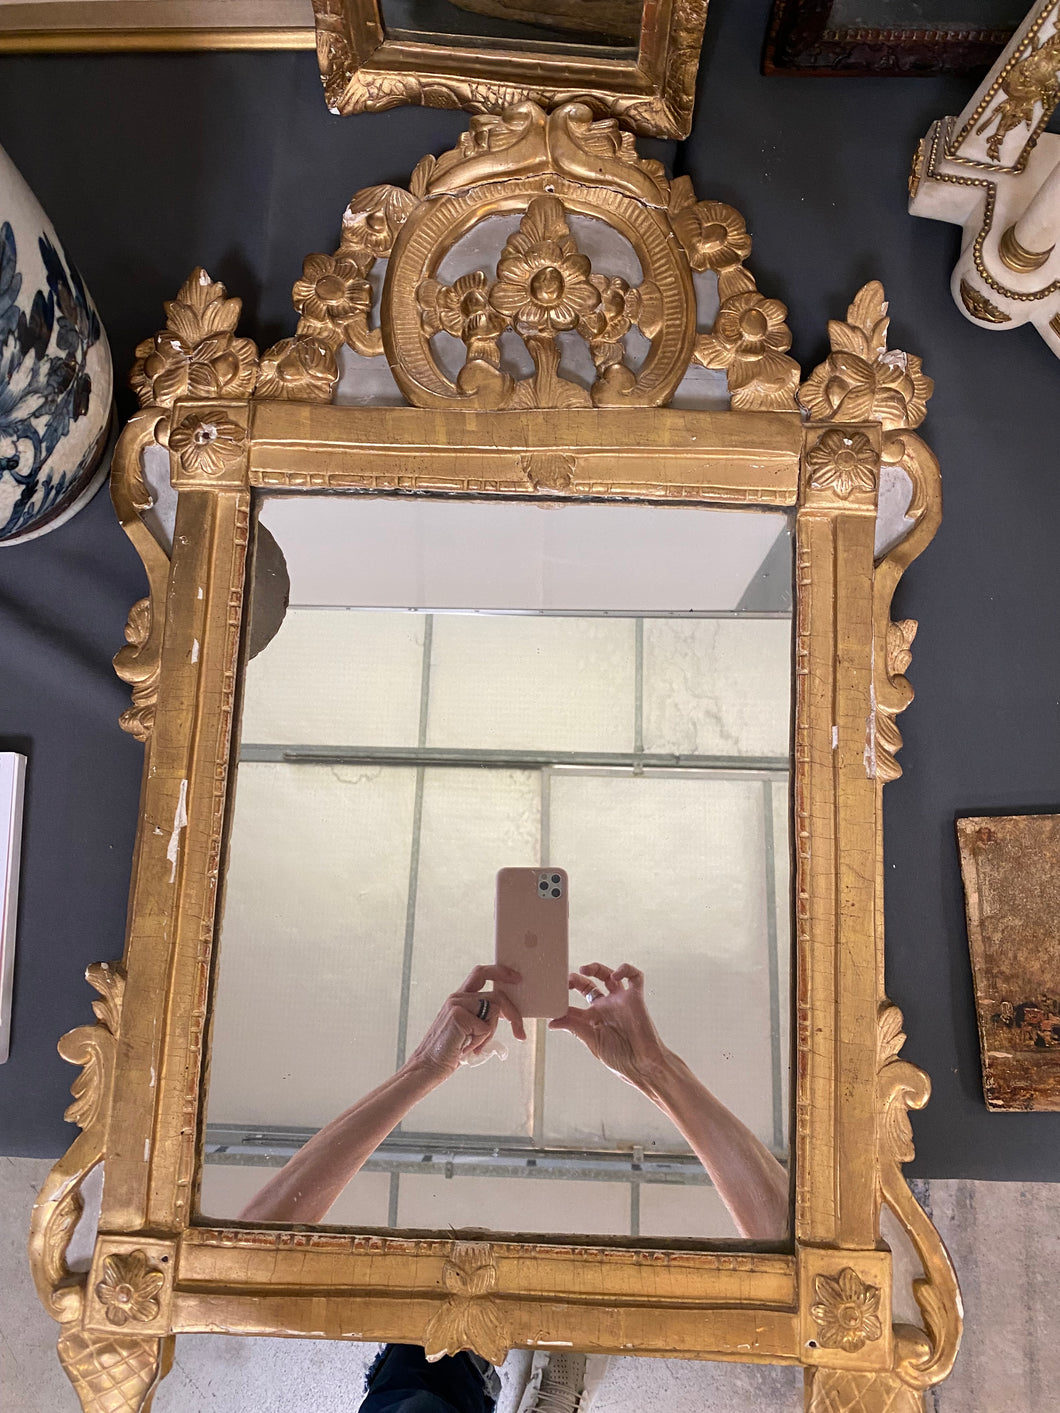 Carved gold rectangular mirror with ornate top carving